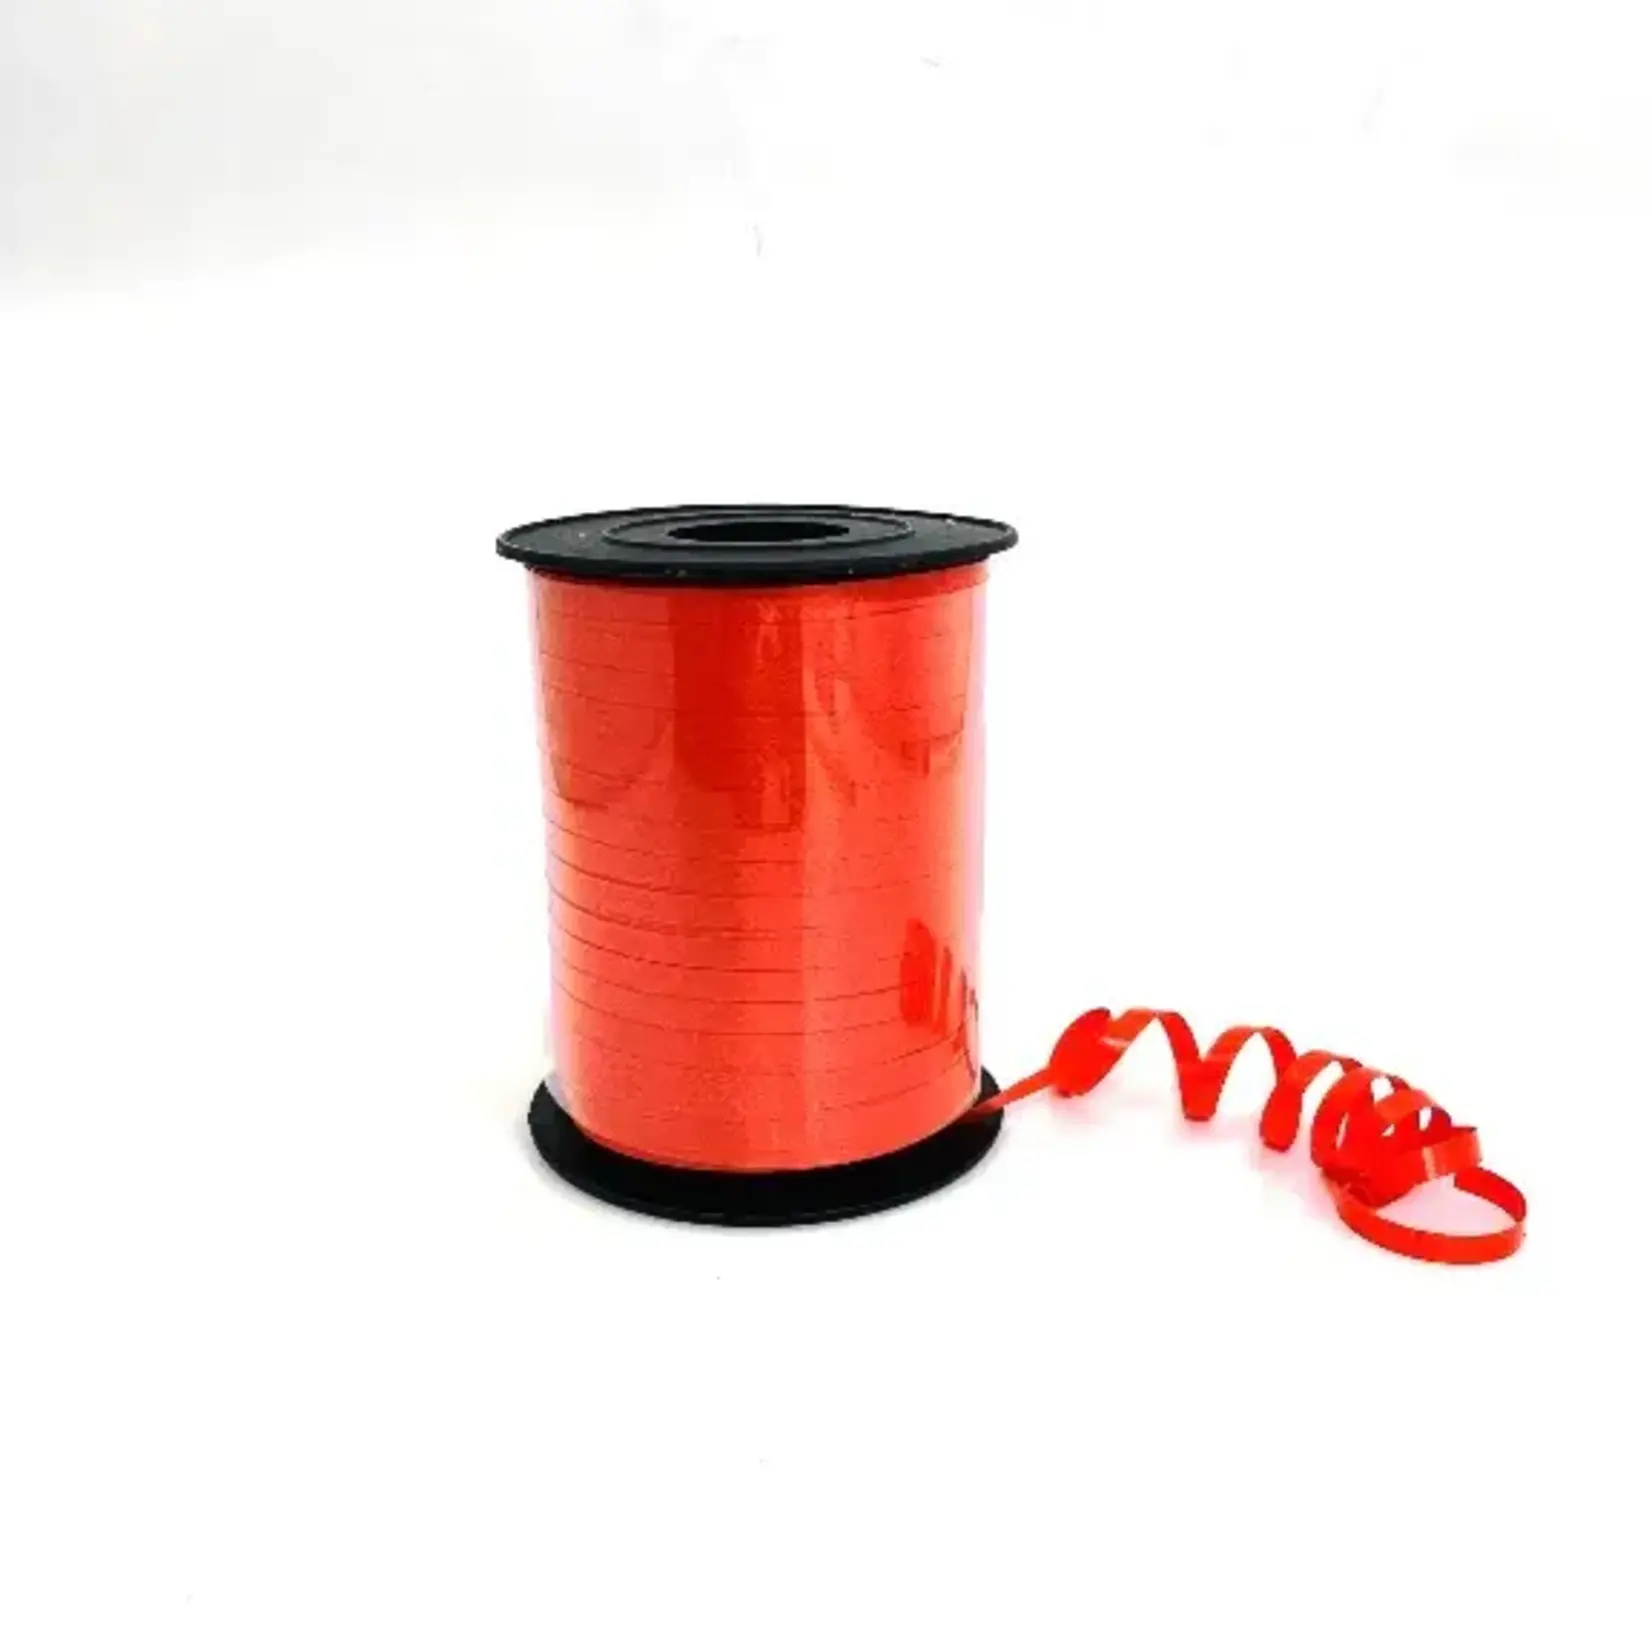 Curling Ribbon In Spool 500 Yards - Red